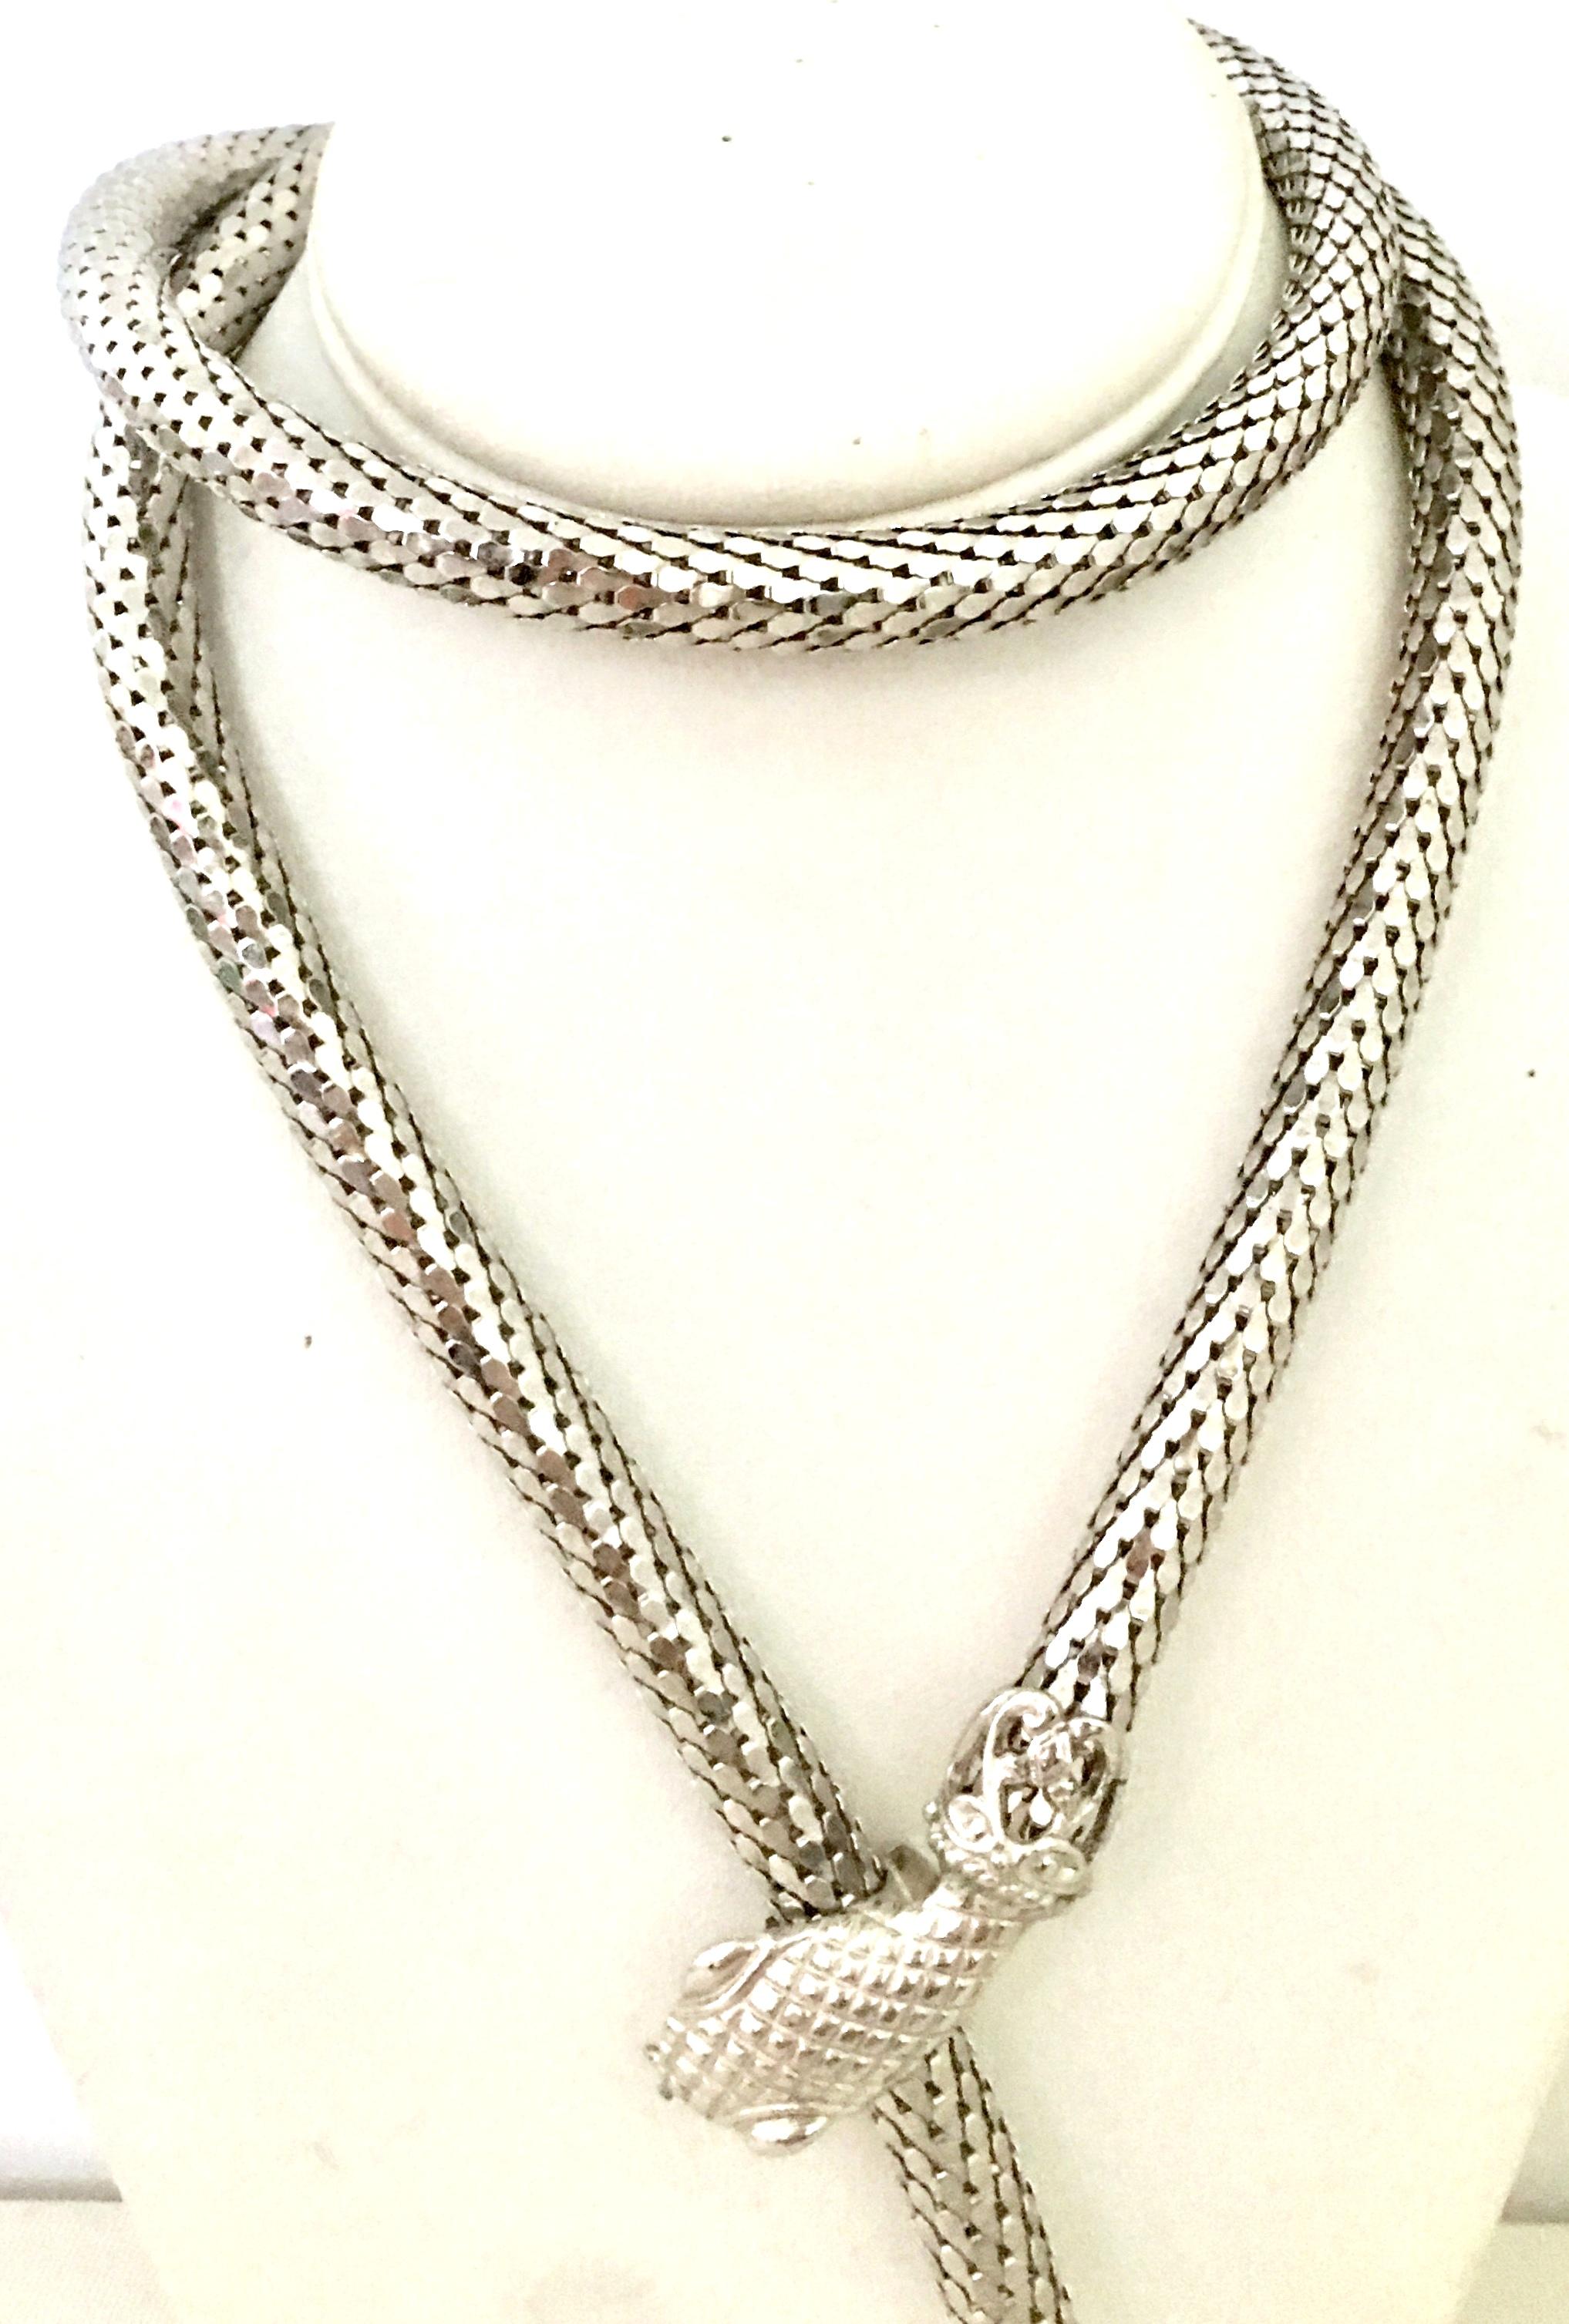 20th Century Silver Metal Mesh Snake Necklace Or Belt By, Whiting & Davis 3